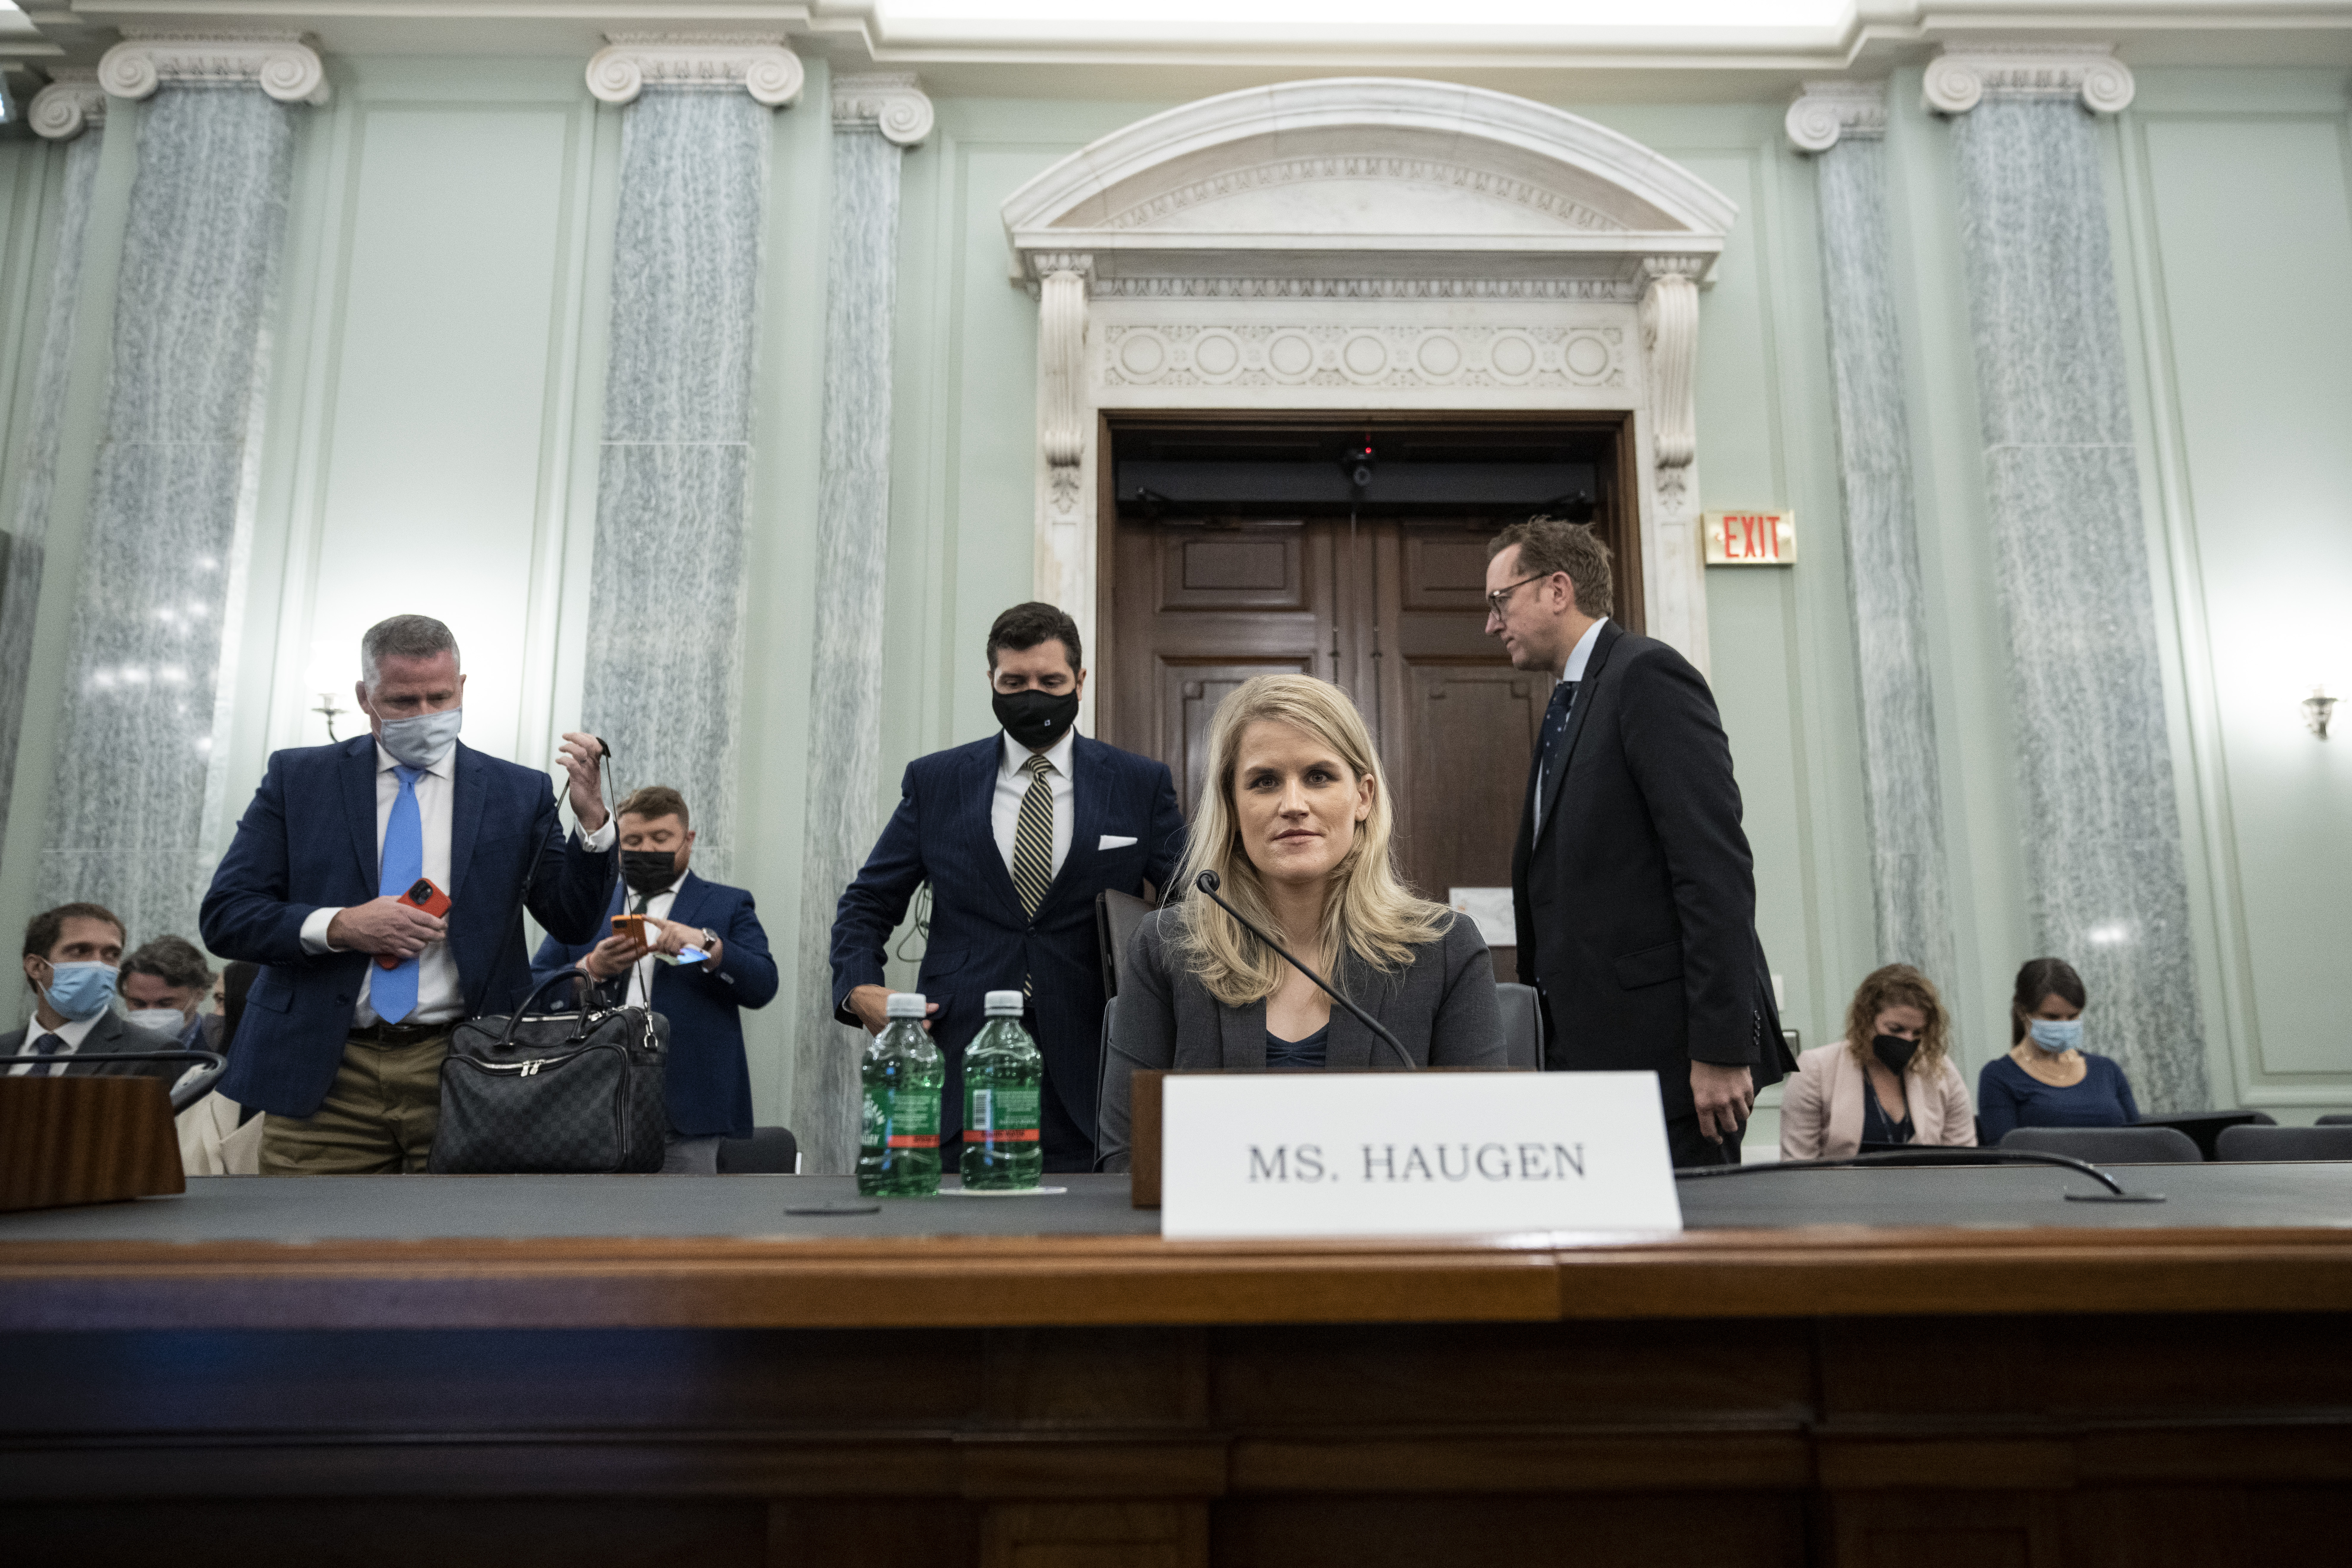 Former Facebook employee Frances Haugen testified on Capitol Hill about how Facebook allegedly drives divisive and false narratives to maximize its profits. (Drew Angerer/Getty Images)